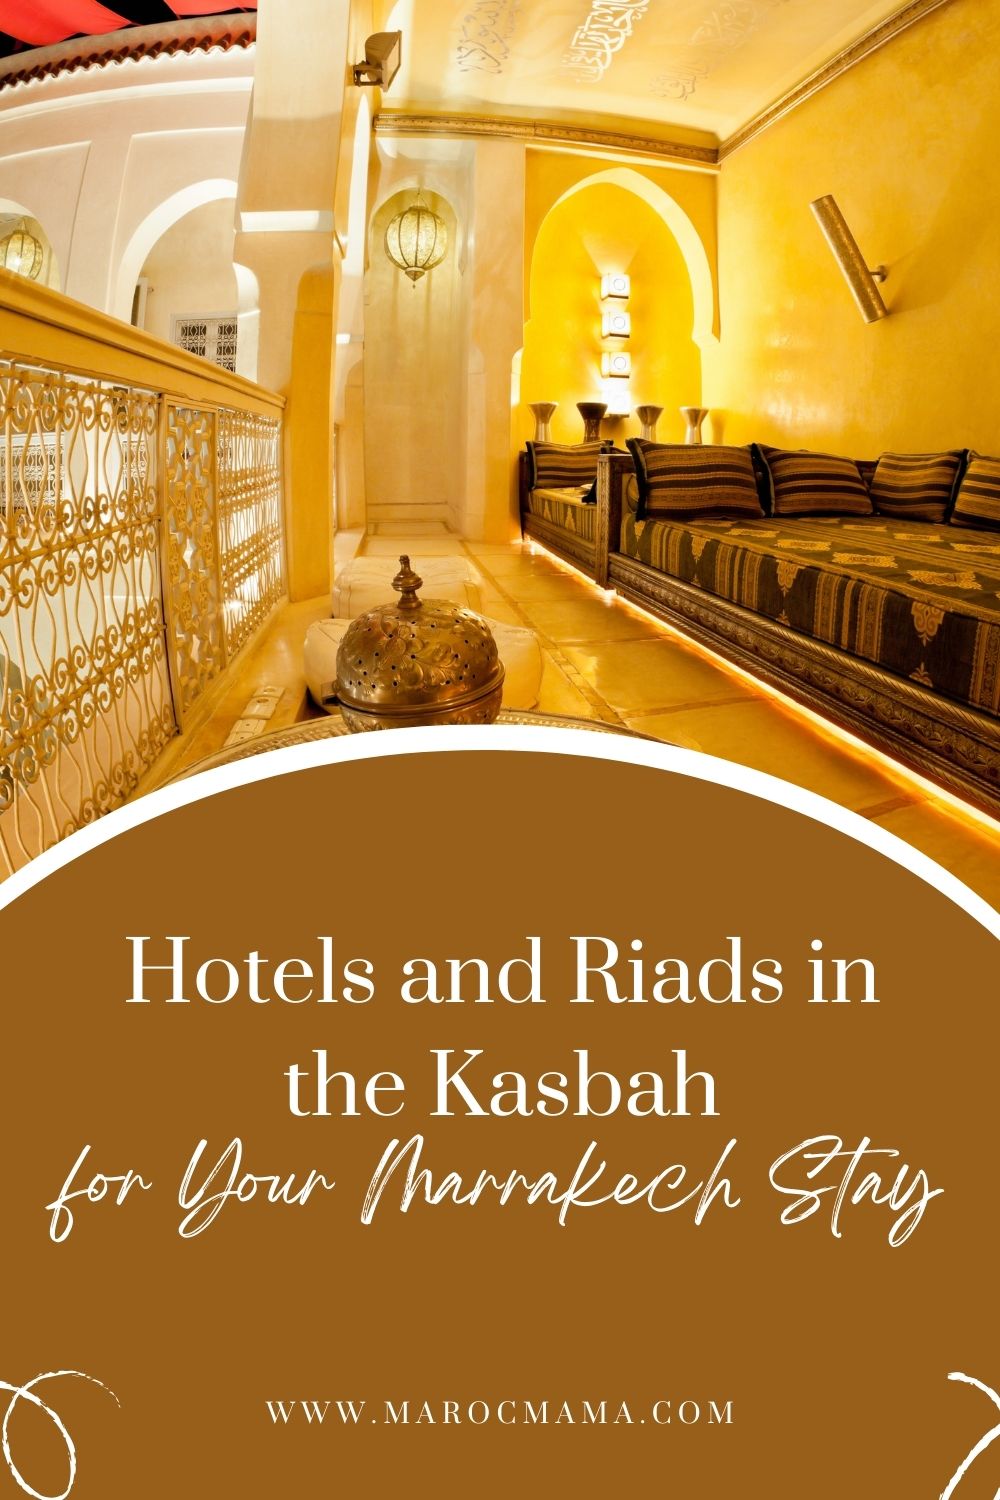 Interior of a riad lounge in Marrakech with the text Riads and Hotels in the Kasbah for Your Marrakech Stay